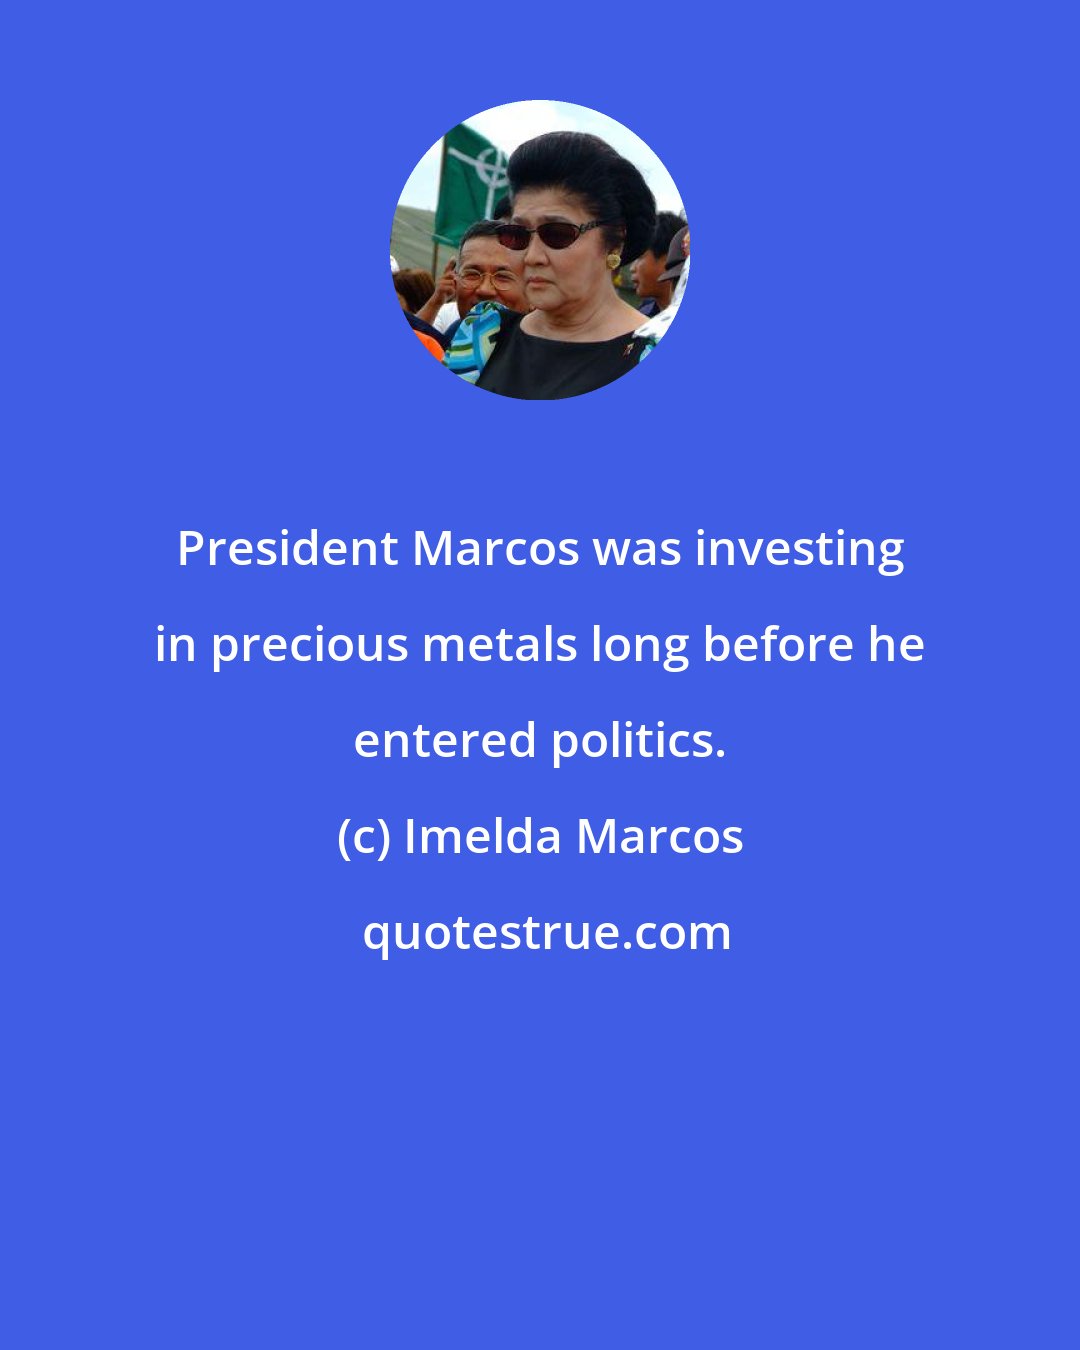 Imelda Marcos: President Marcos was investing in precious metals long before he entered politics.